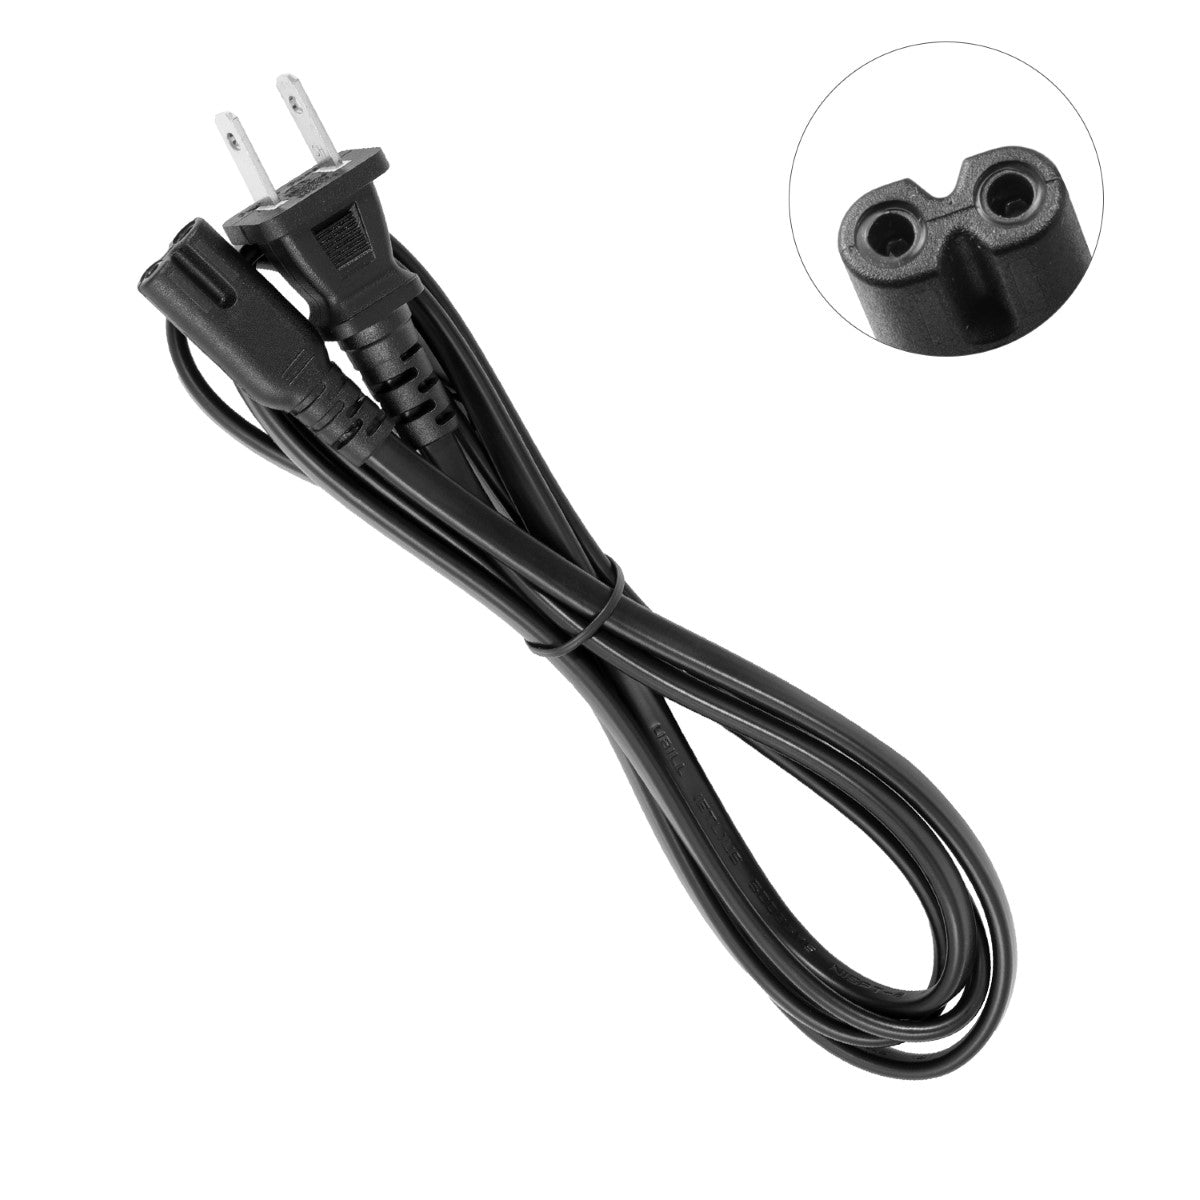 Power Cable for HP DeskJet Plus 4155/4155e All-in-One Printer.